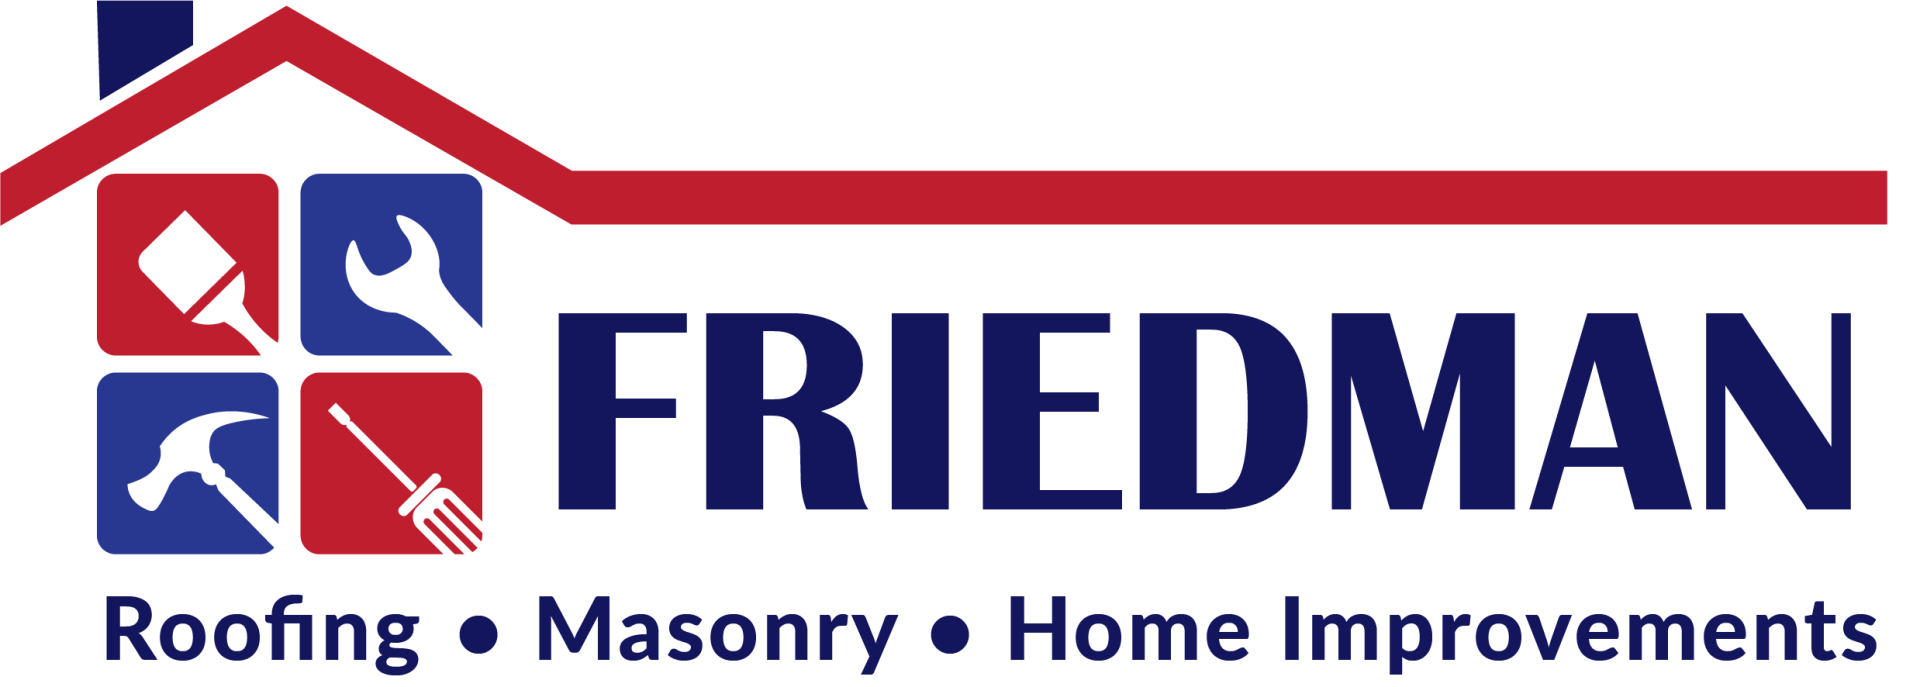 Friedman Home Improvement and Roof Repair Fairborn and Dayton OH Logo